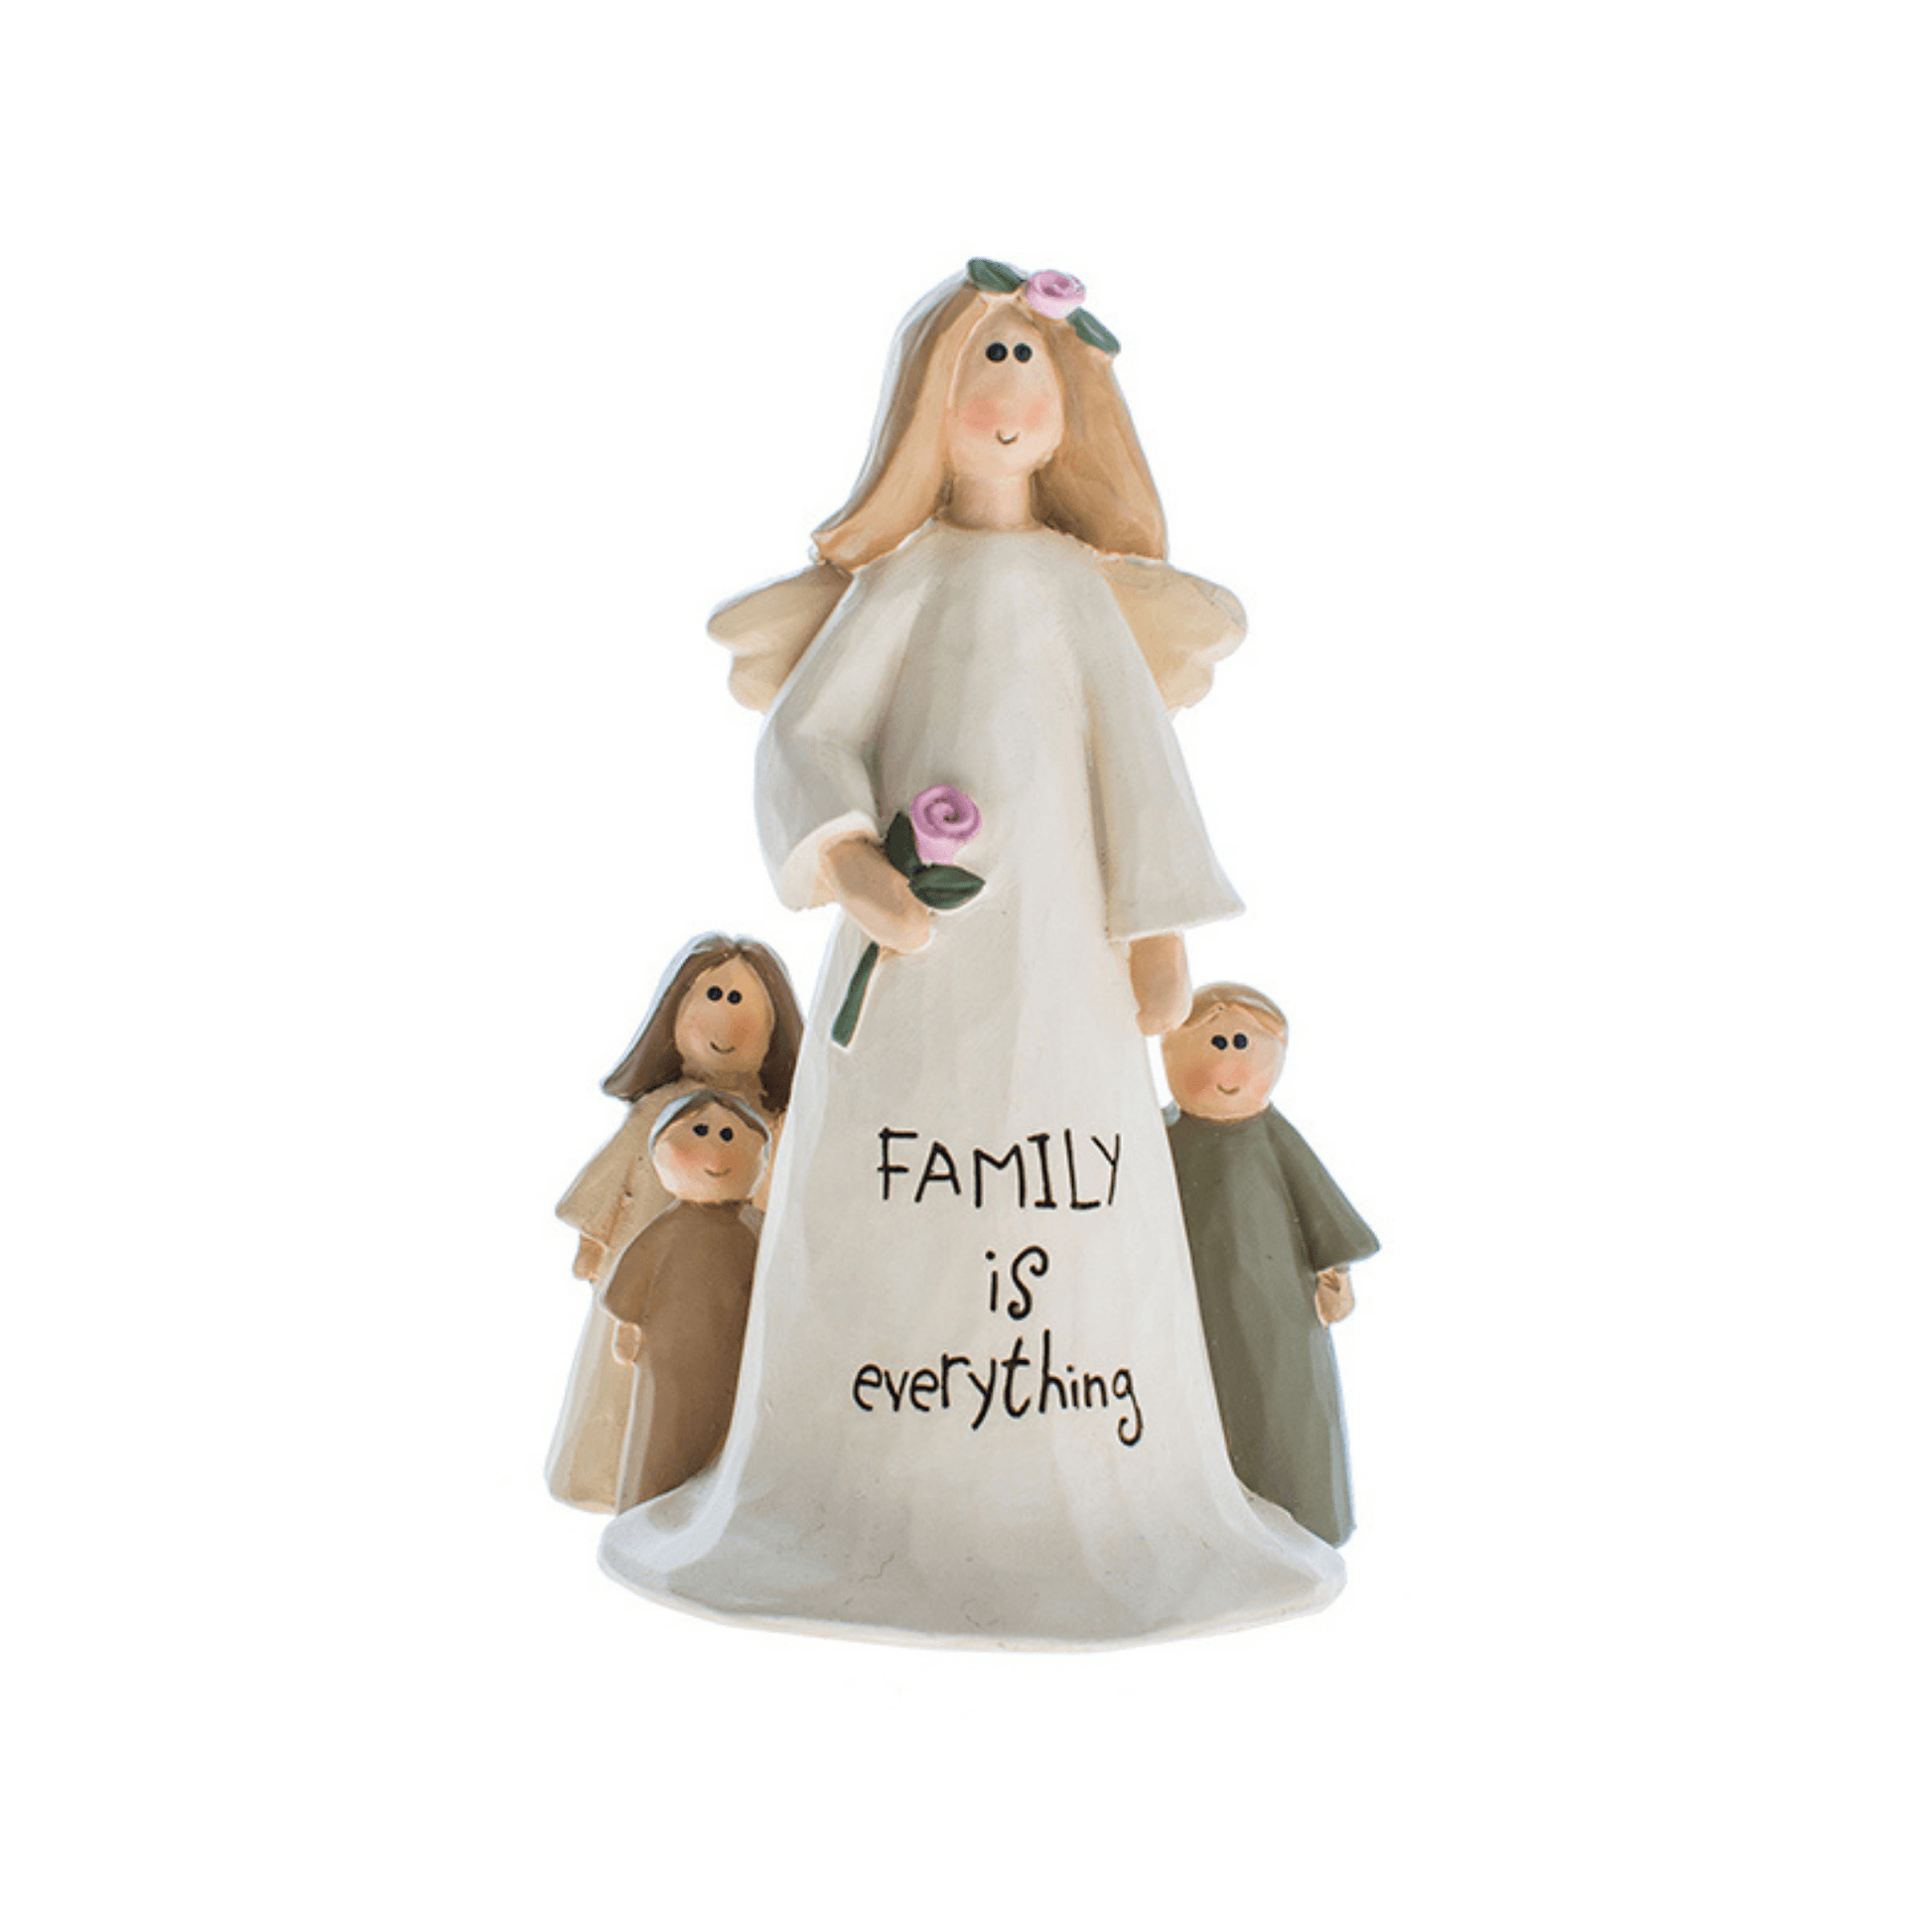 "Family is Everything" Resin Angel Decoration - Peppy & Sage